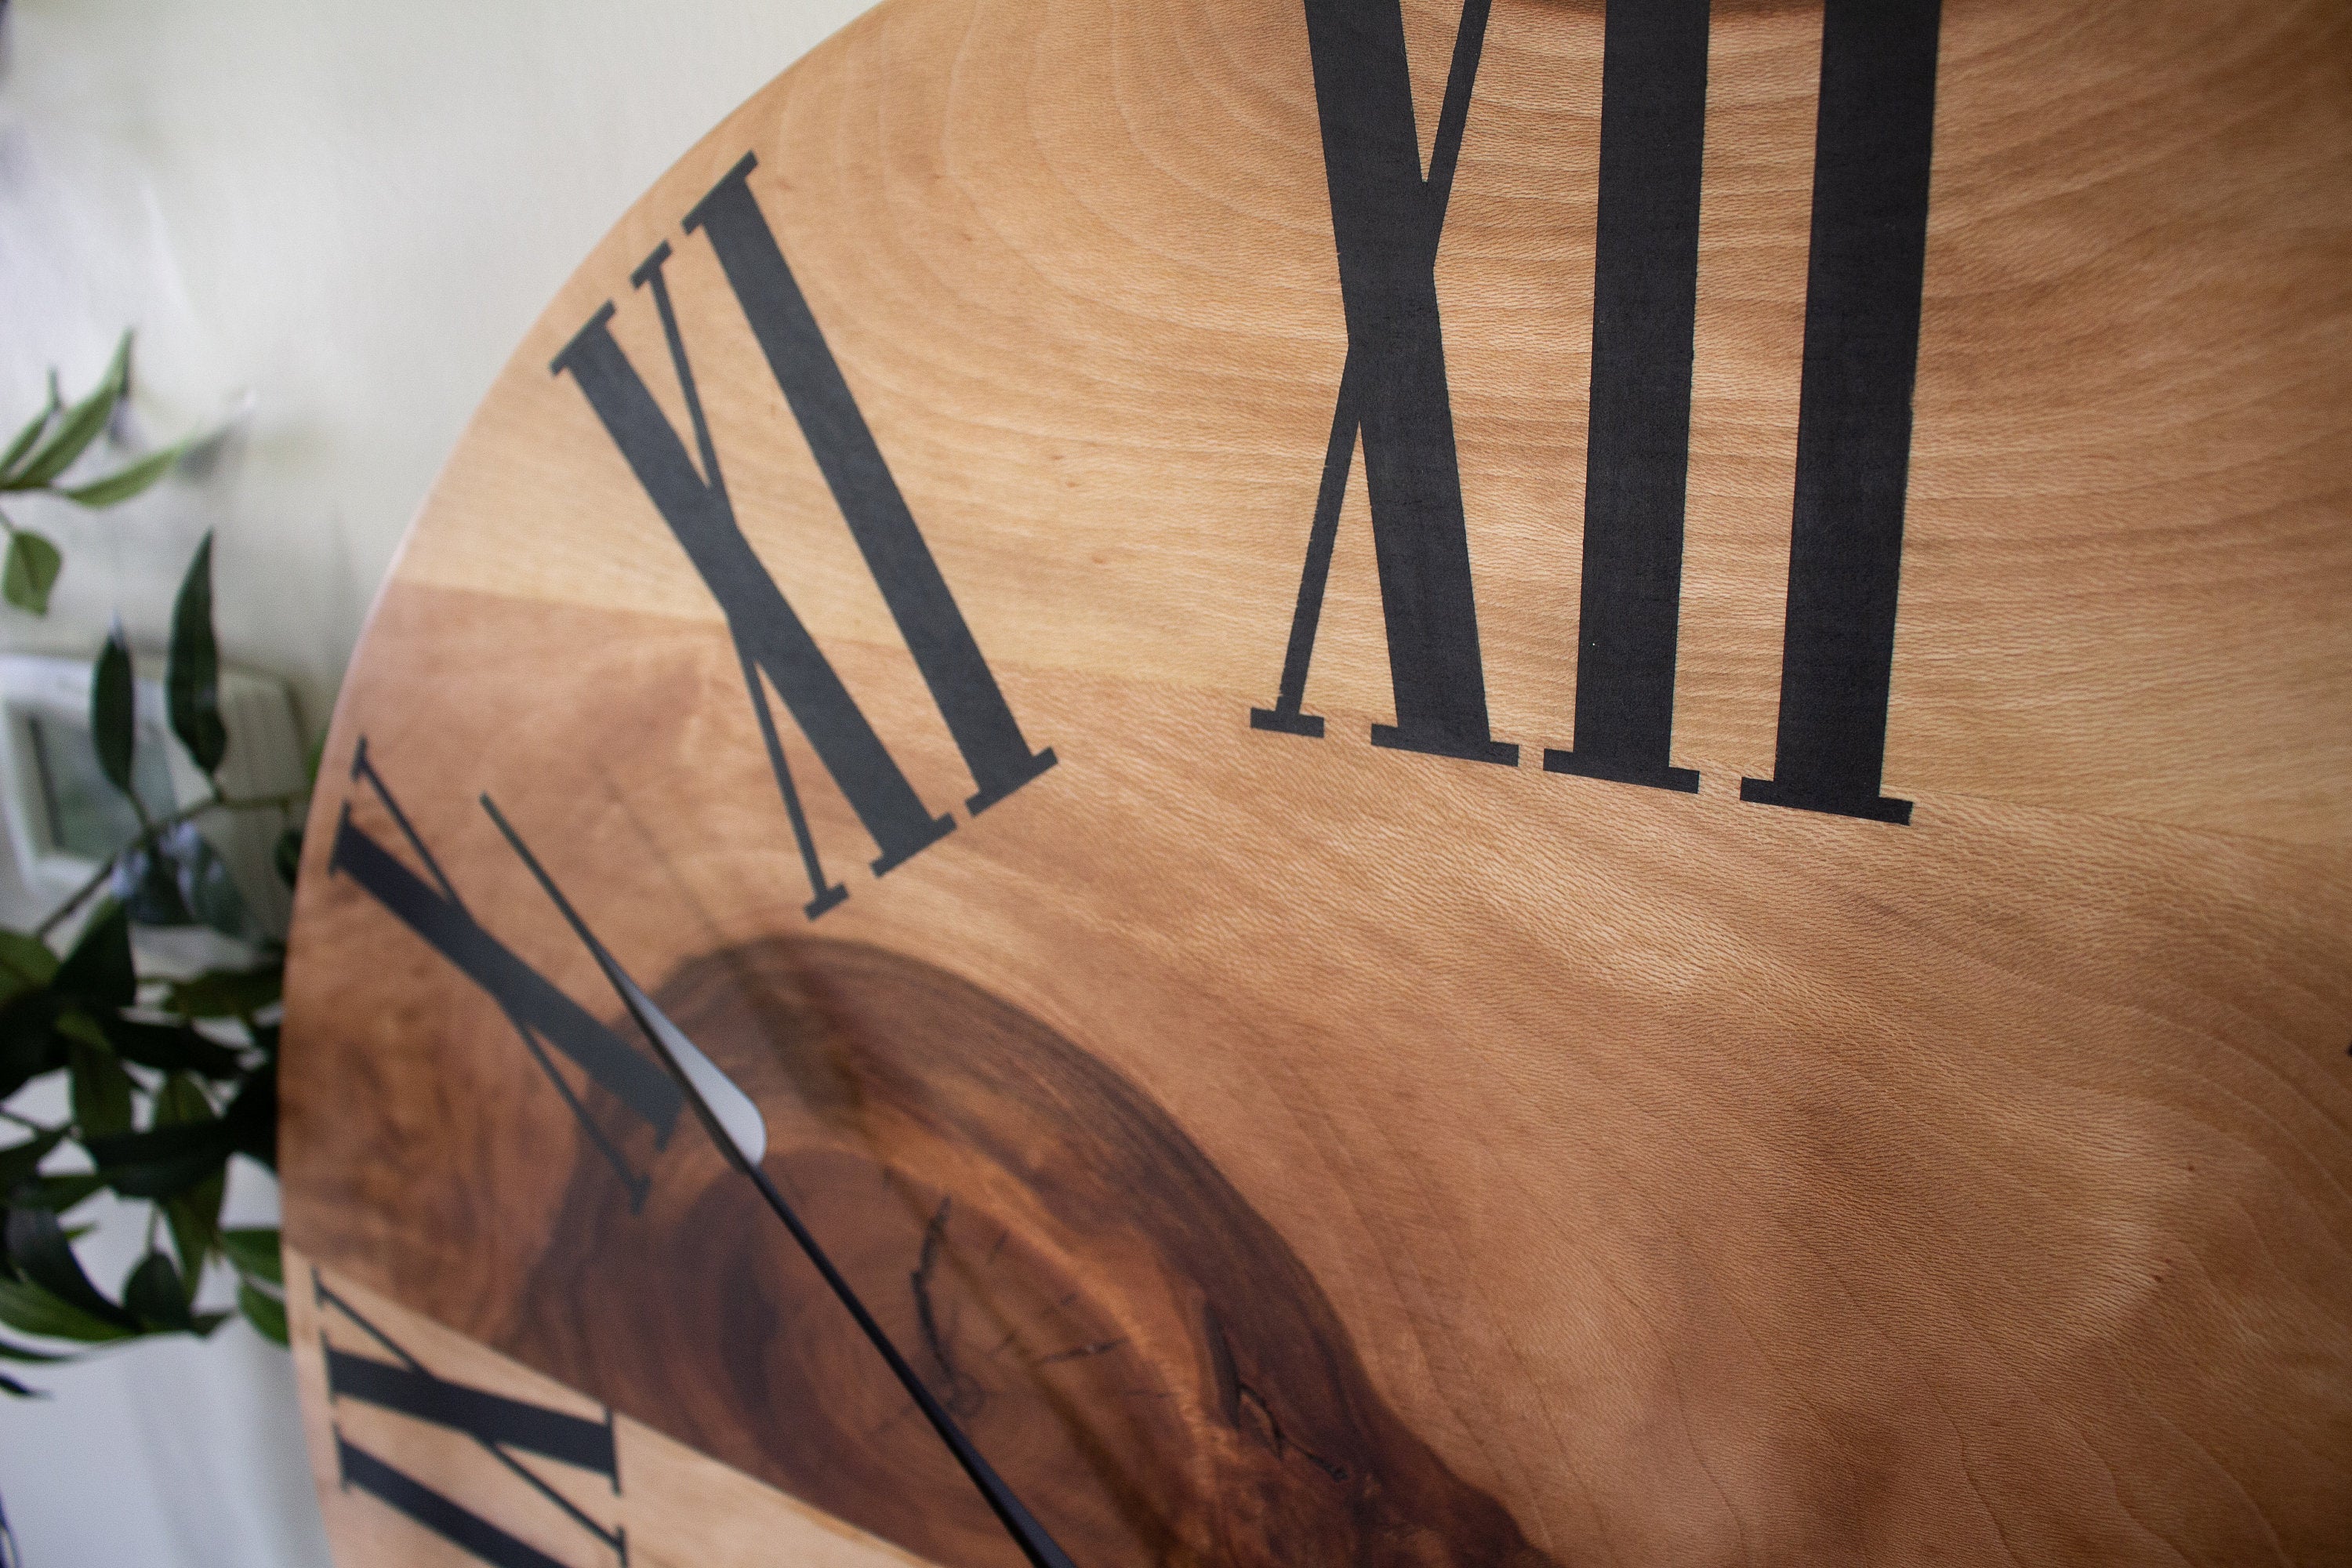 Large Solid Sycamore Hardwood Farmhouse Wall Clock with Black Roman Numerals